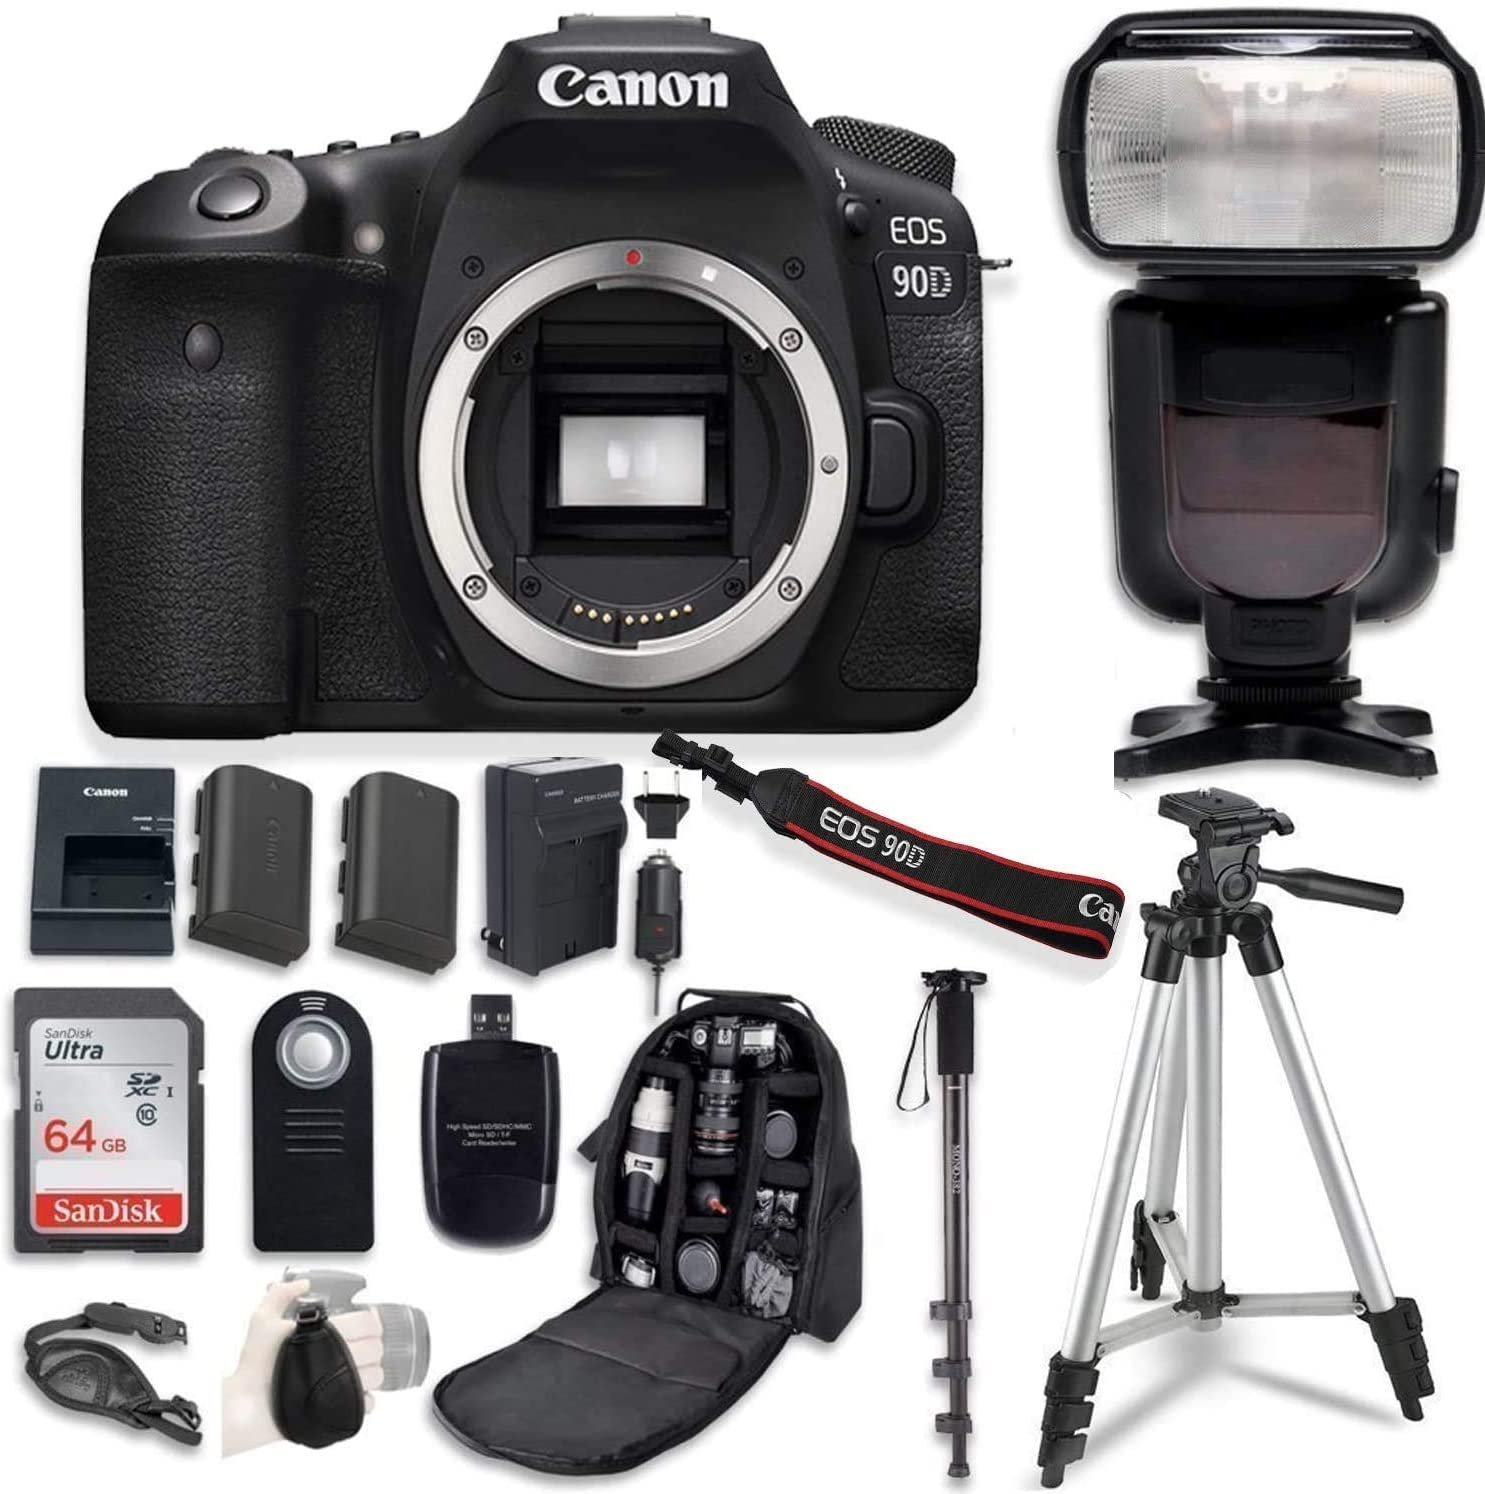 Canon EOS 90D Digital SLR Camera Bundle Body Only with Professional Accessory Bundle 14 Items - image 1 of 2